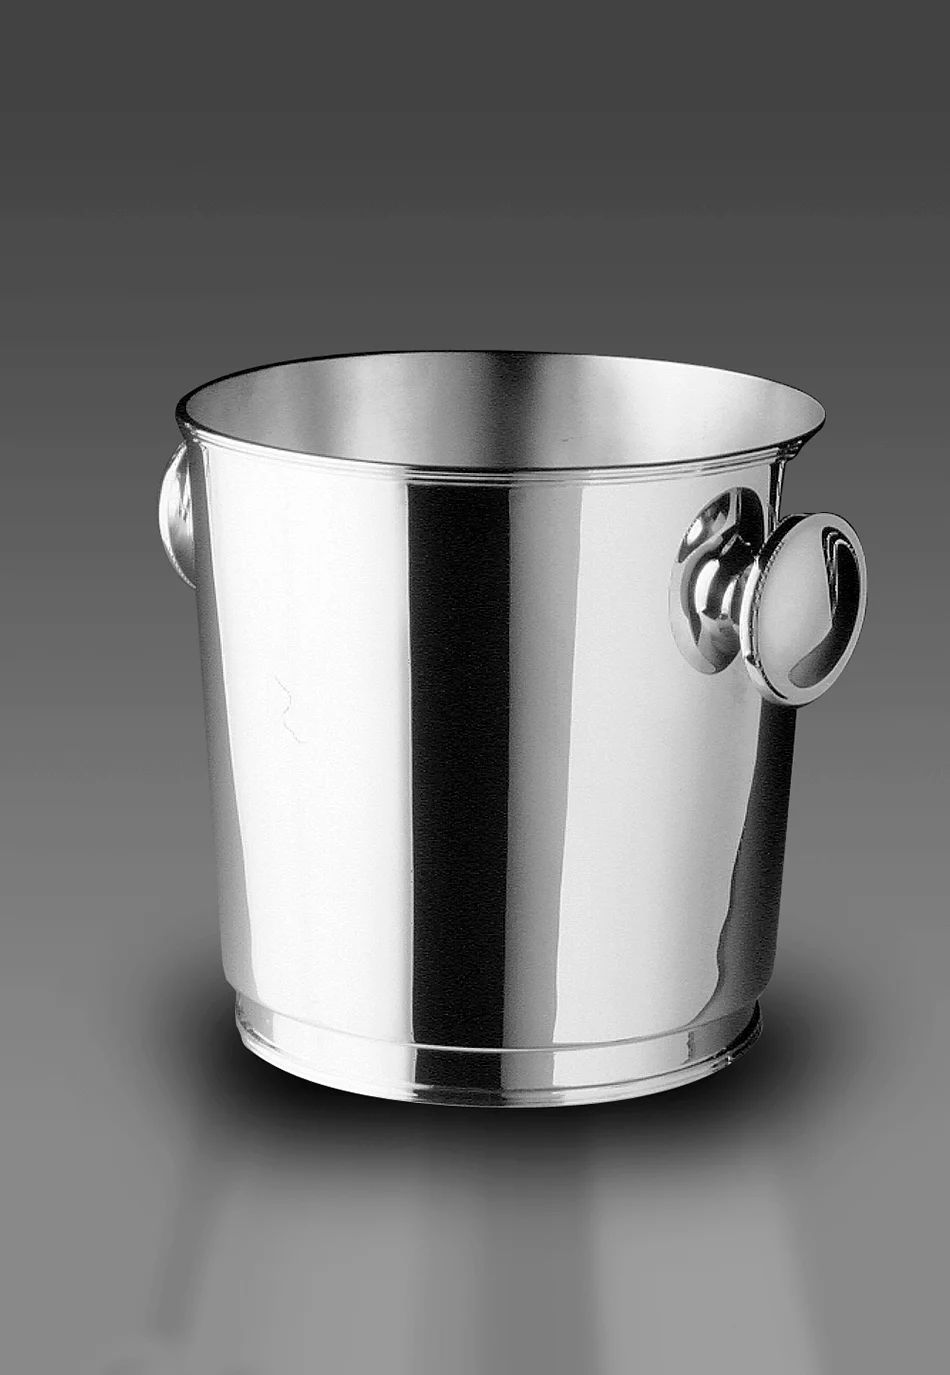 Champagne cooler with handles (90g silverplated)